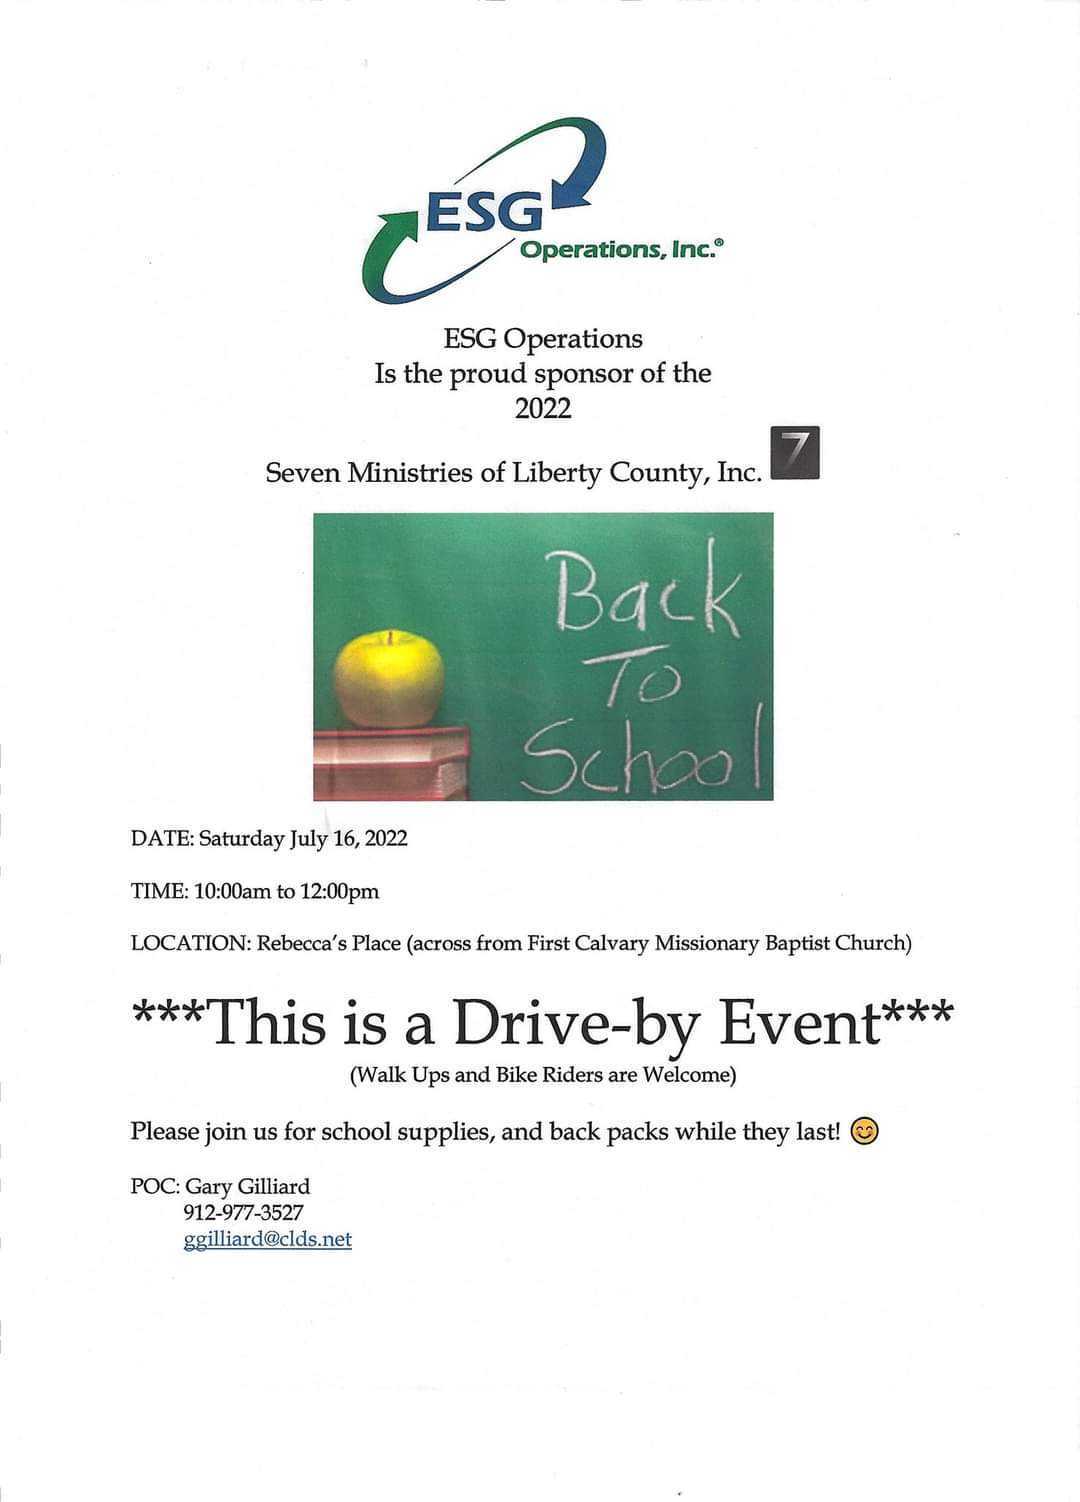 Flyer for Back to school event